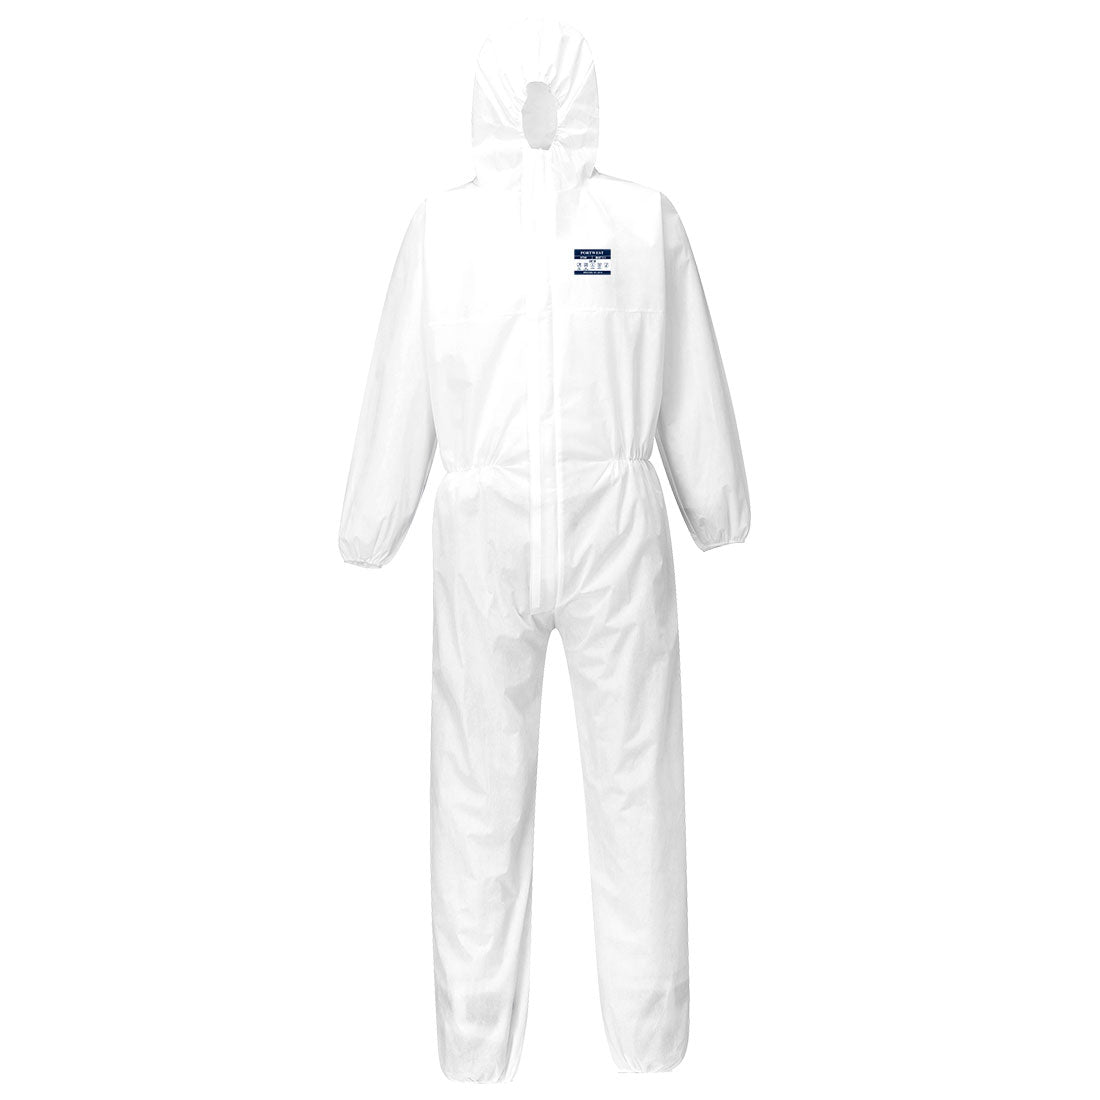 BizTex SMS Coverall Type 5/6 (Pk50)  (ST30)